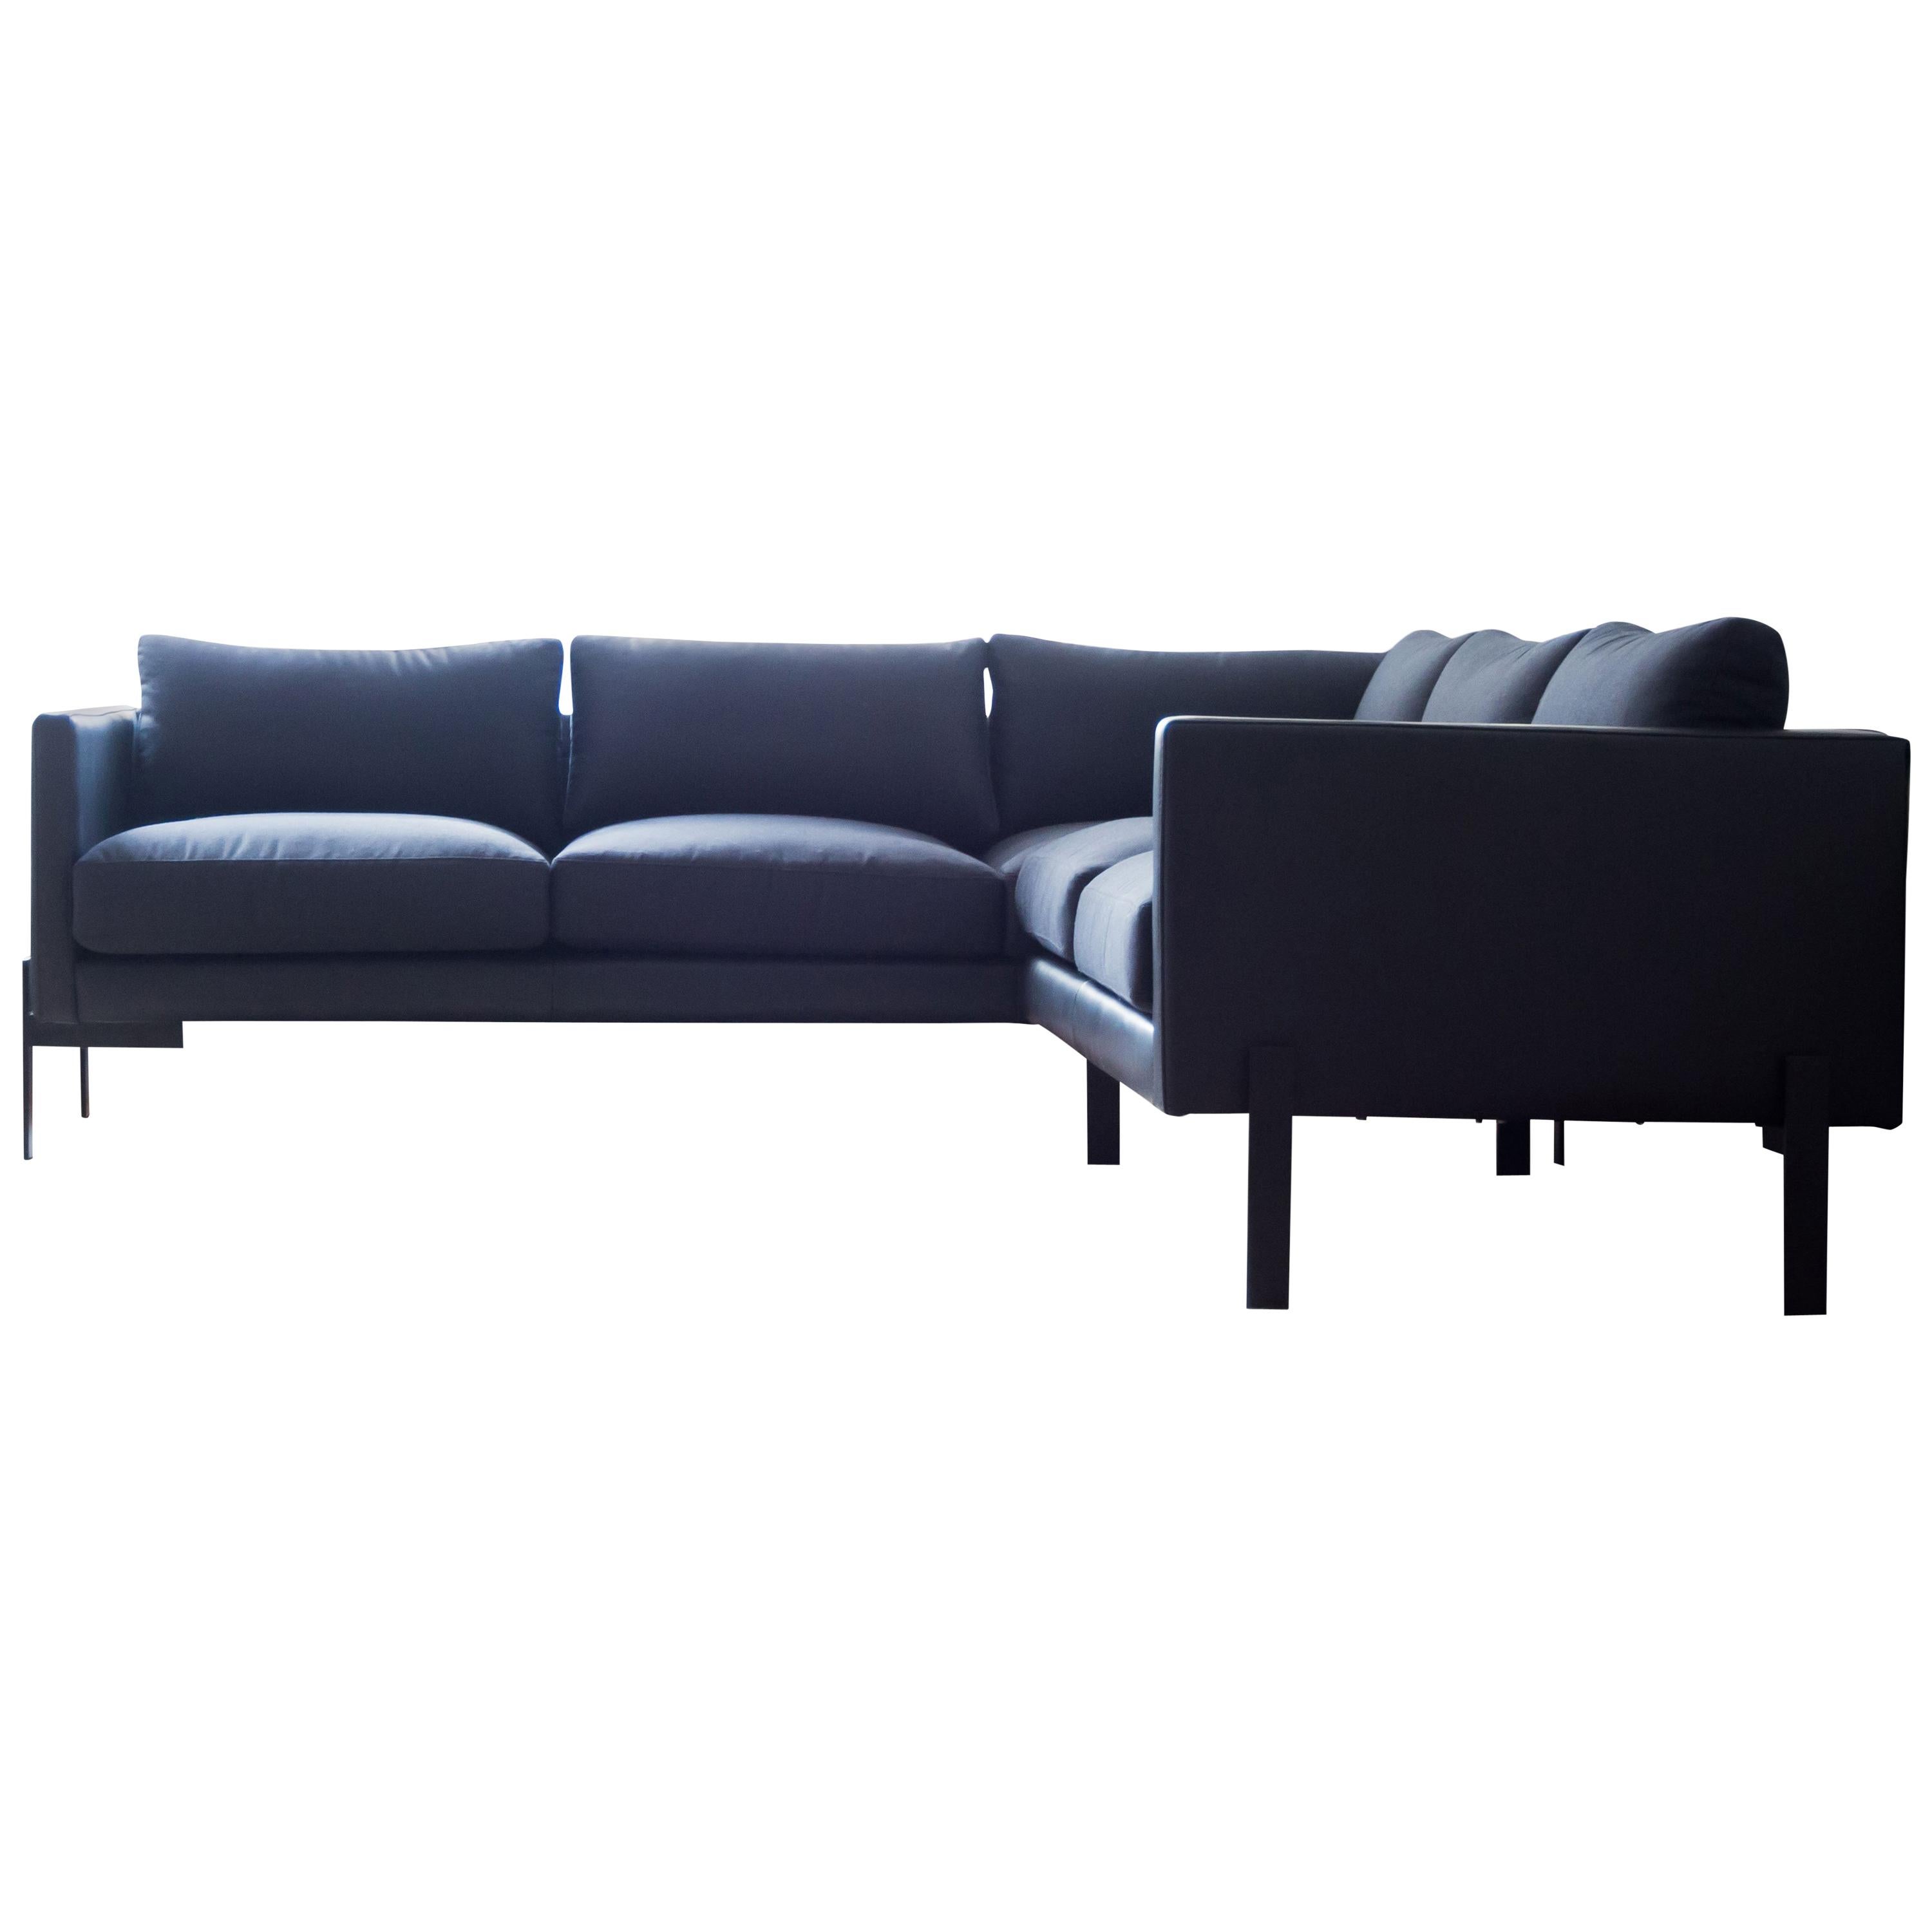 Truss Five-Seat Sectional in Mixed-Media Midnight and Bayou by TRNK For Sale